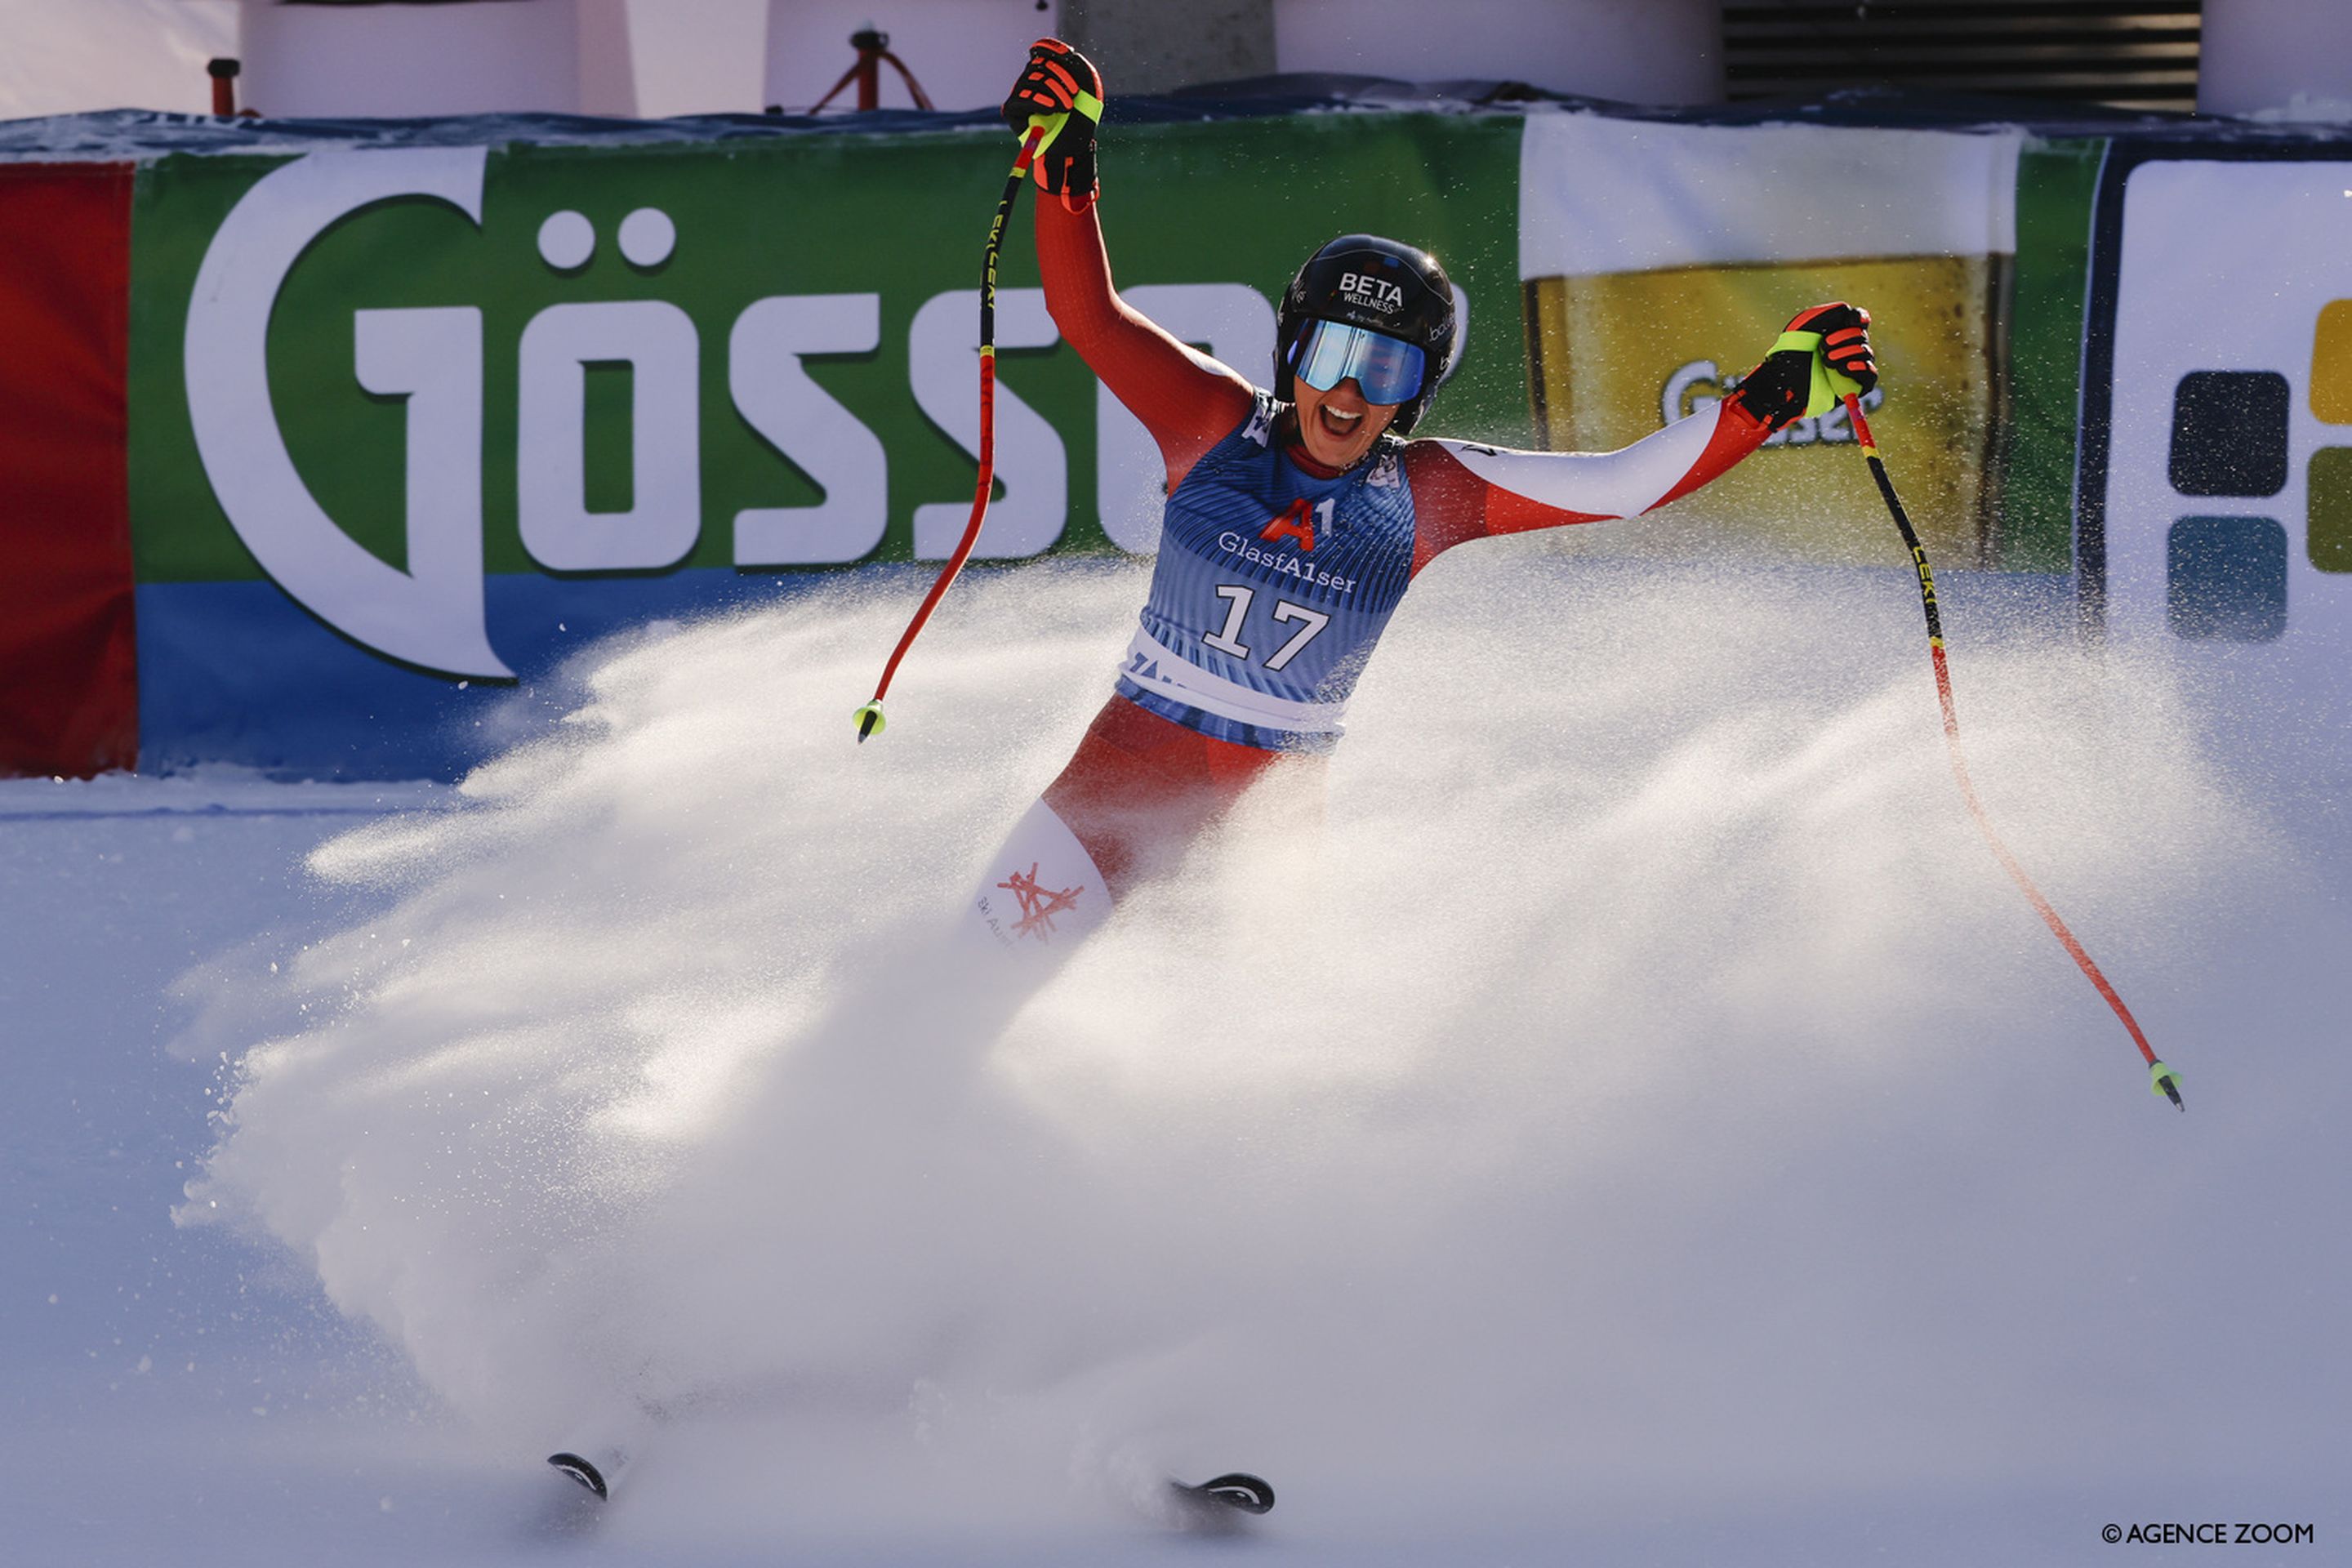 Stephanie Venier (AUT) was delighted after skiing into second place (Agence Zoom)